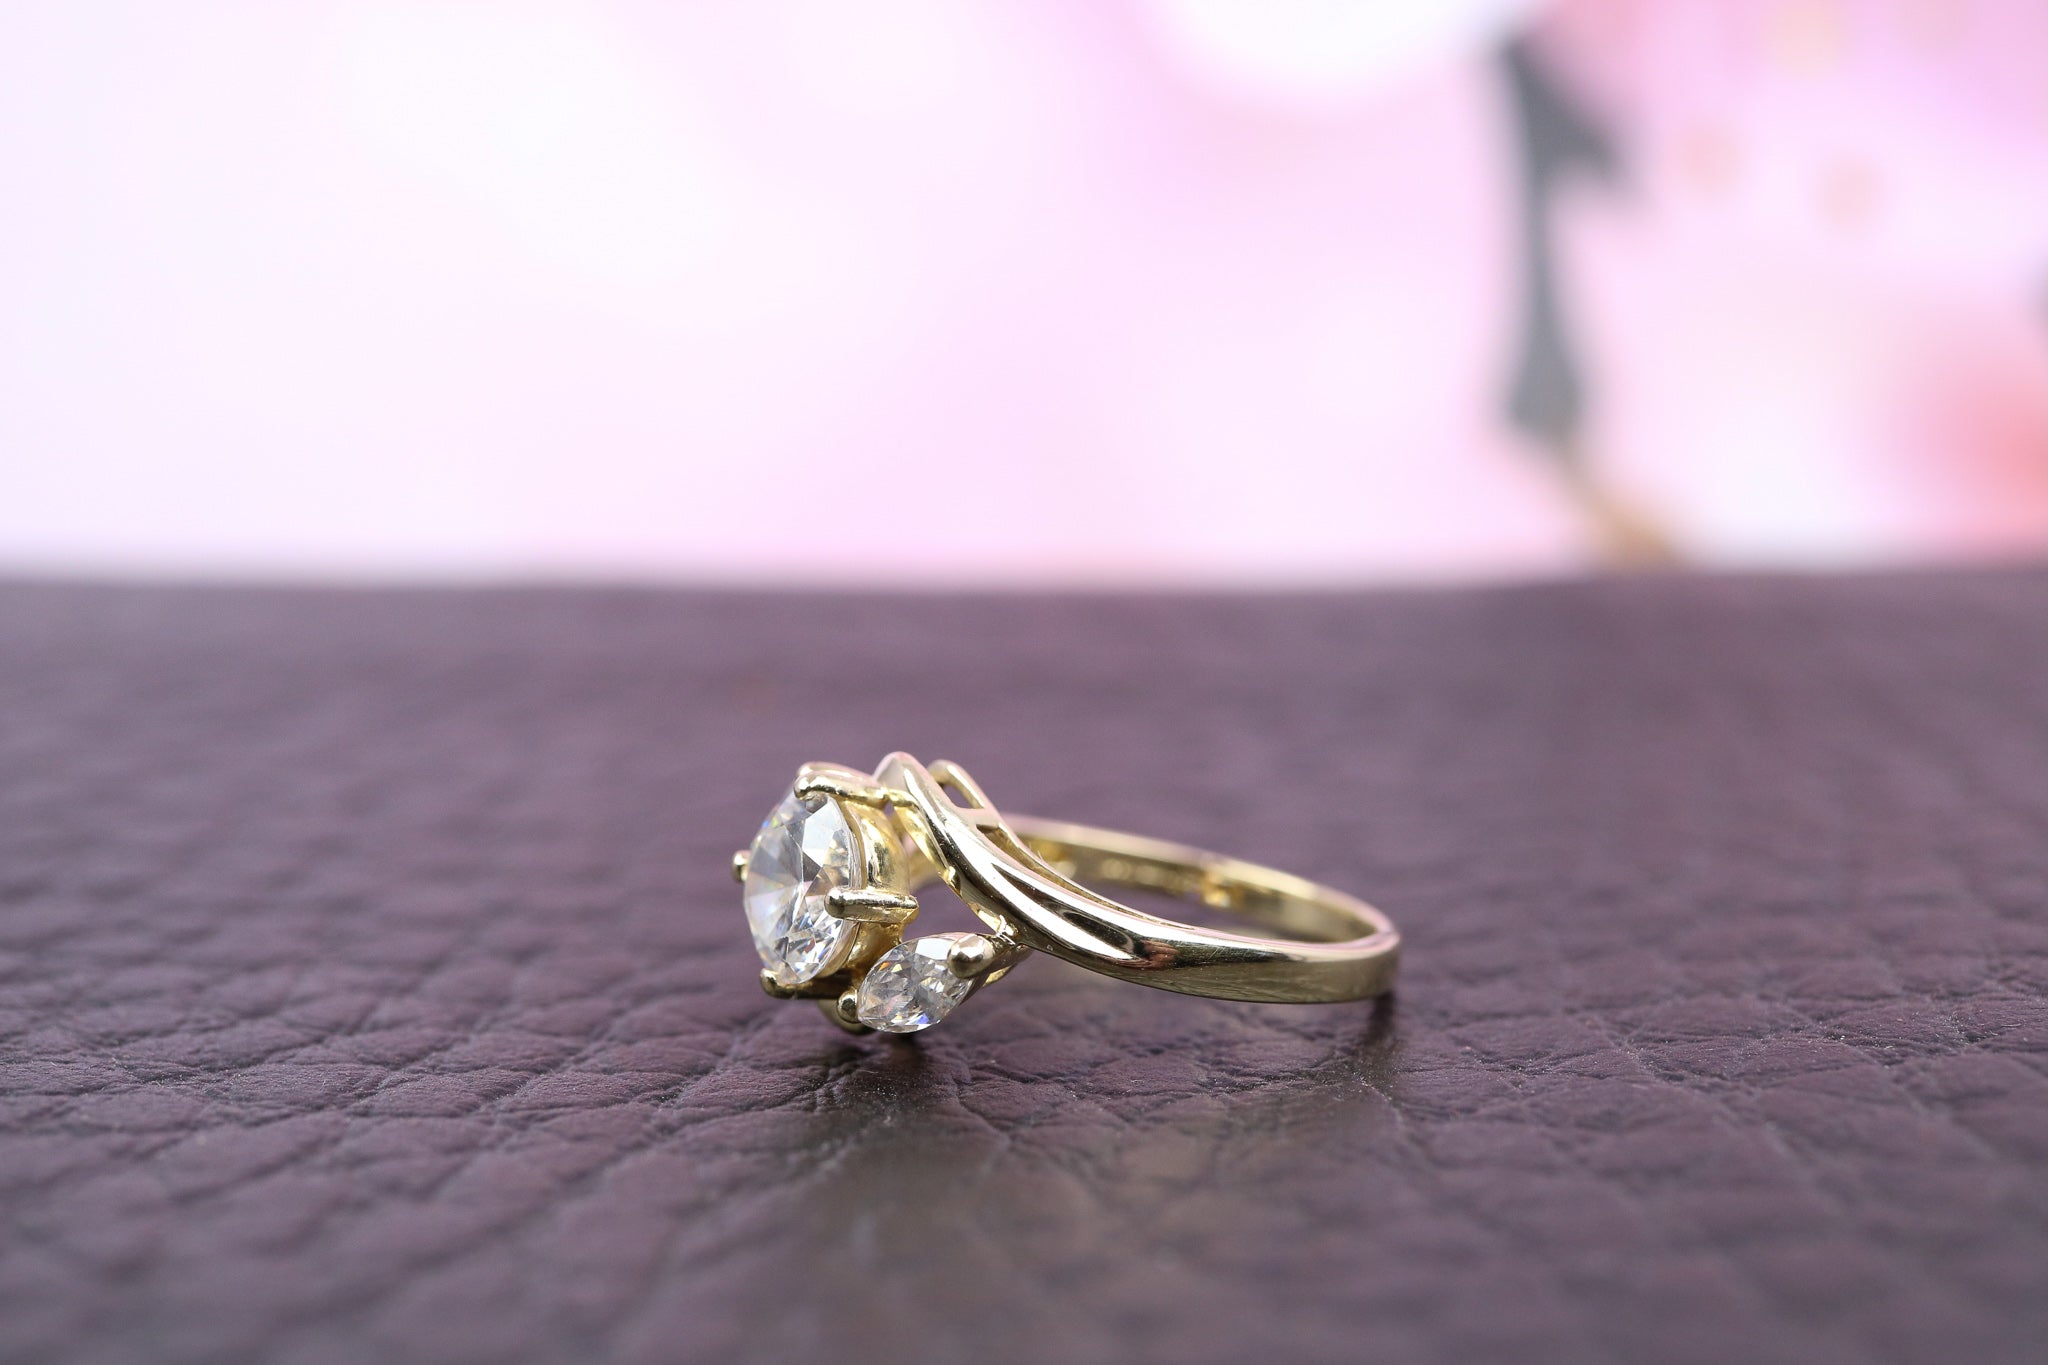 14ct Yellow gold & Cubic Zirconia Ring - HJ2488 - Hallmark Jewellers Formby & The Jewellers Bench Widnes